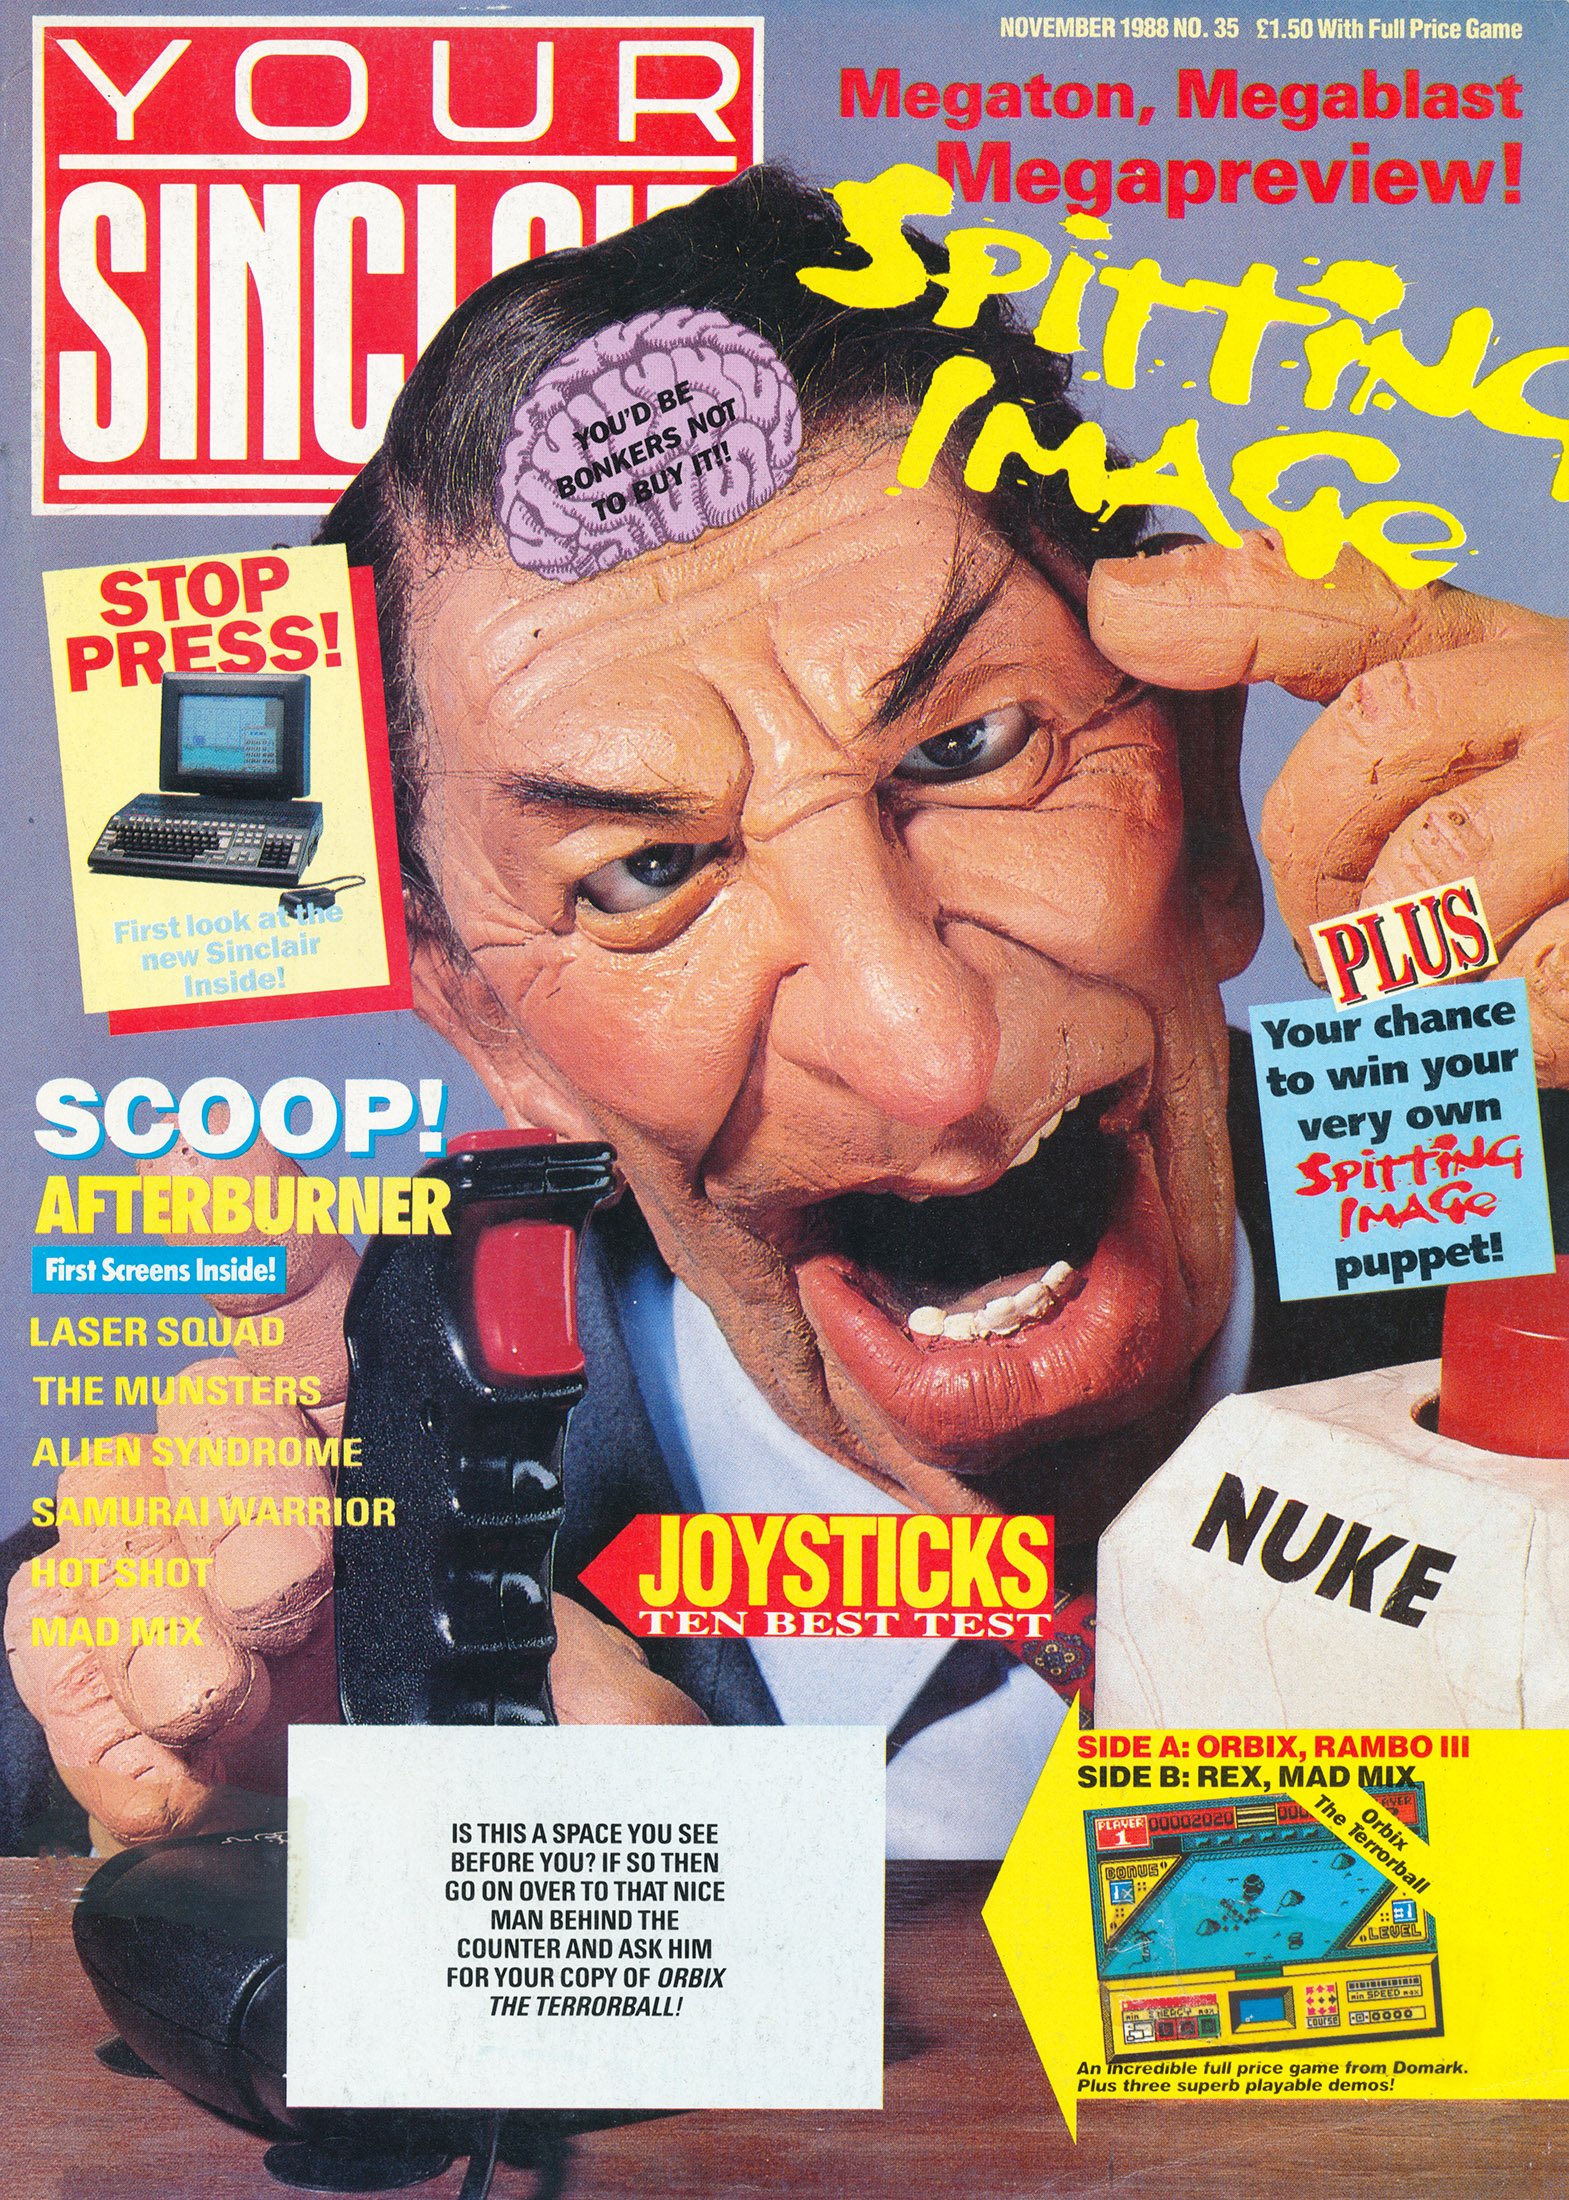 Your Sinclair Issue 35 (November 1988)